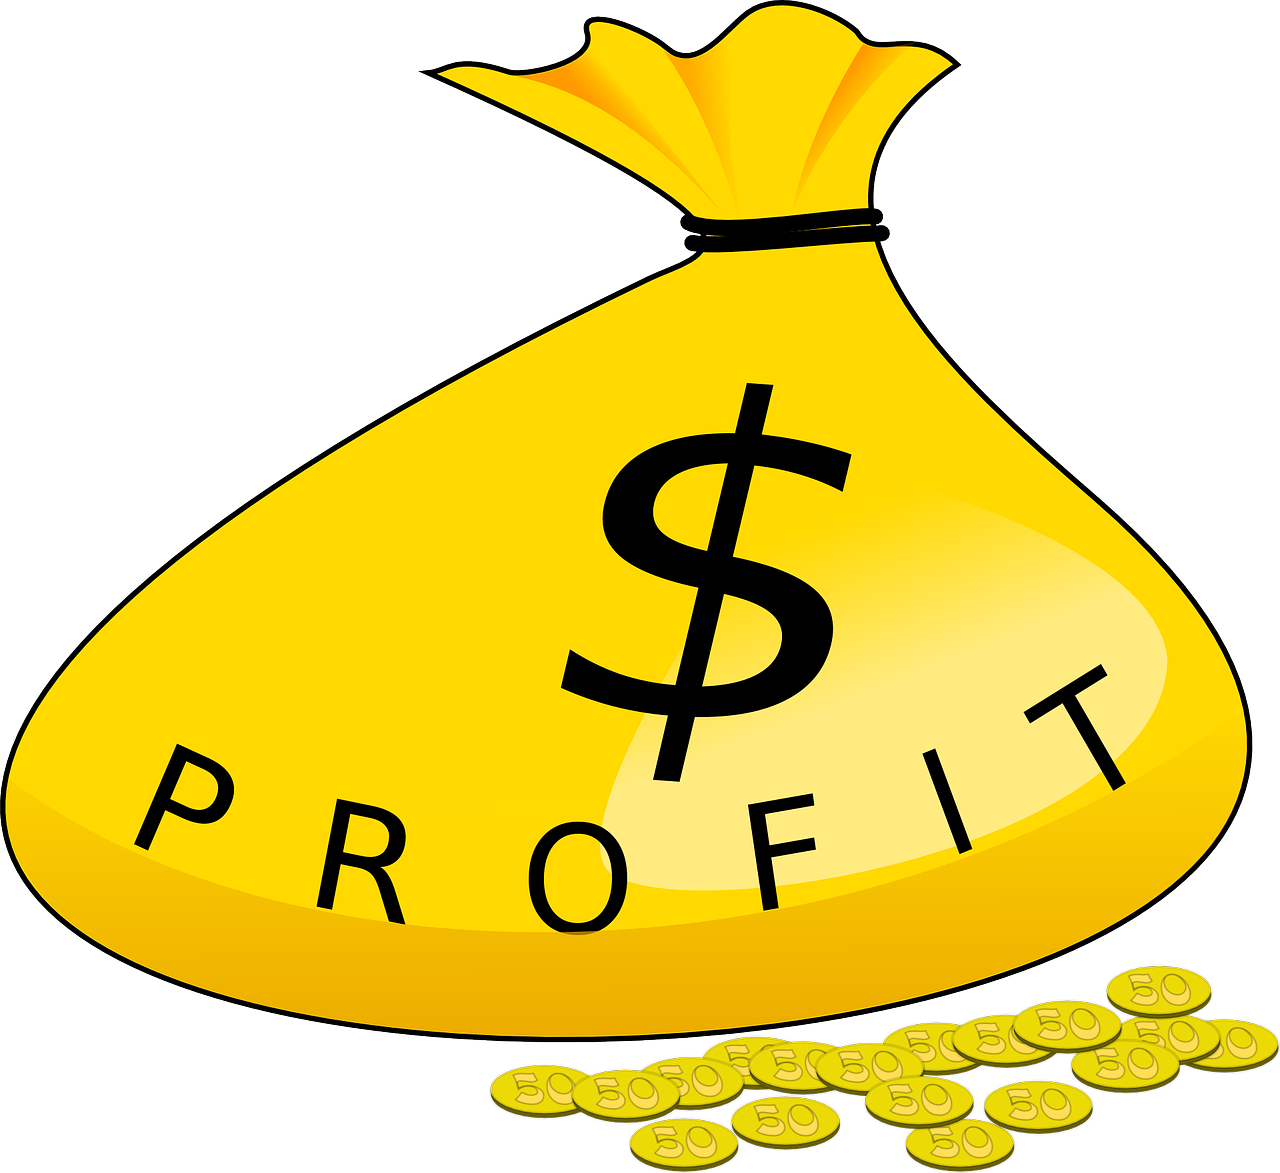 Profit Ratio: Definition, Calculation, and Best Practices